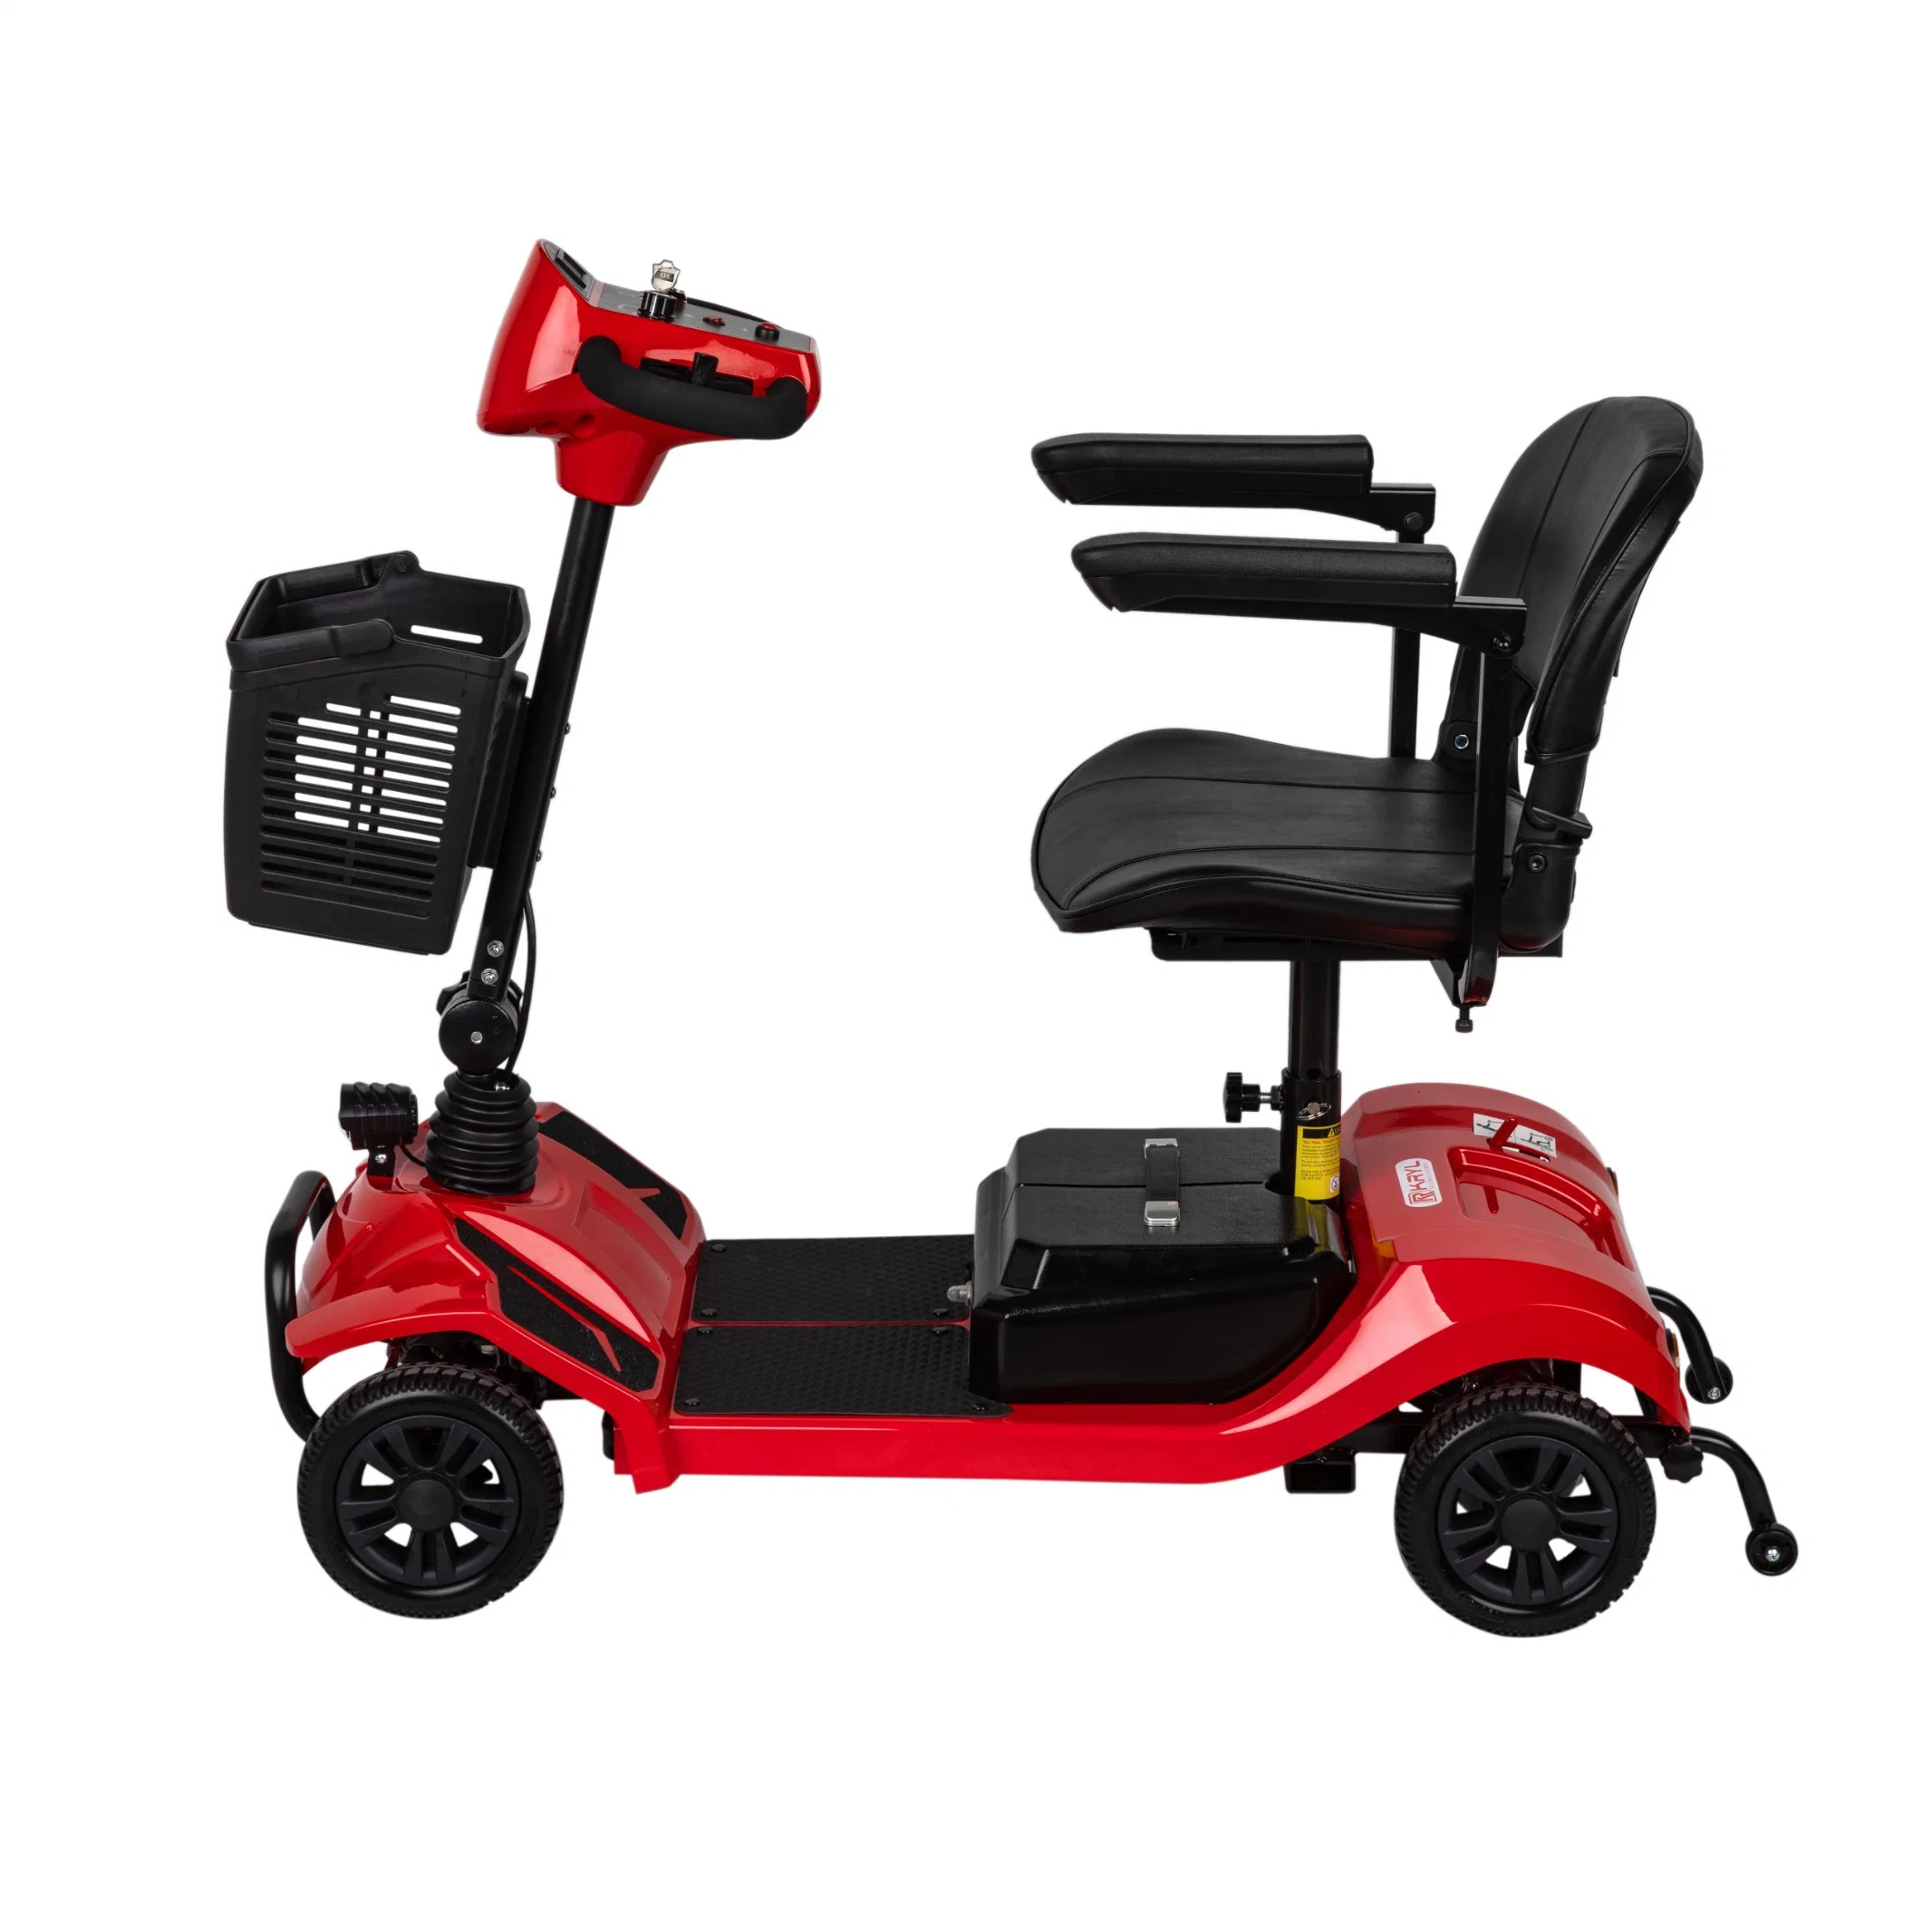 24V/250W Disability Electric Mobility Scooter/Handicap Scooter